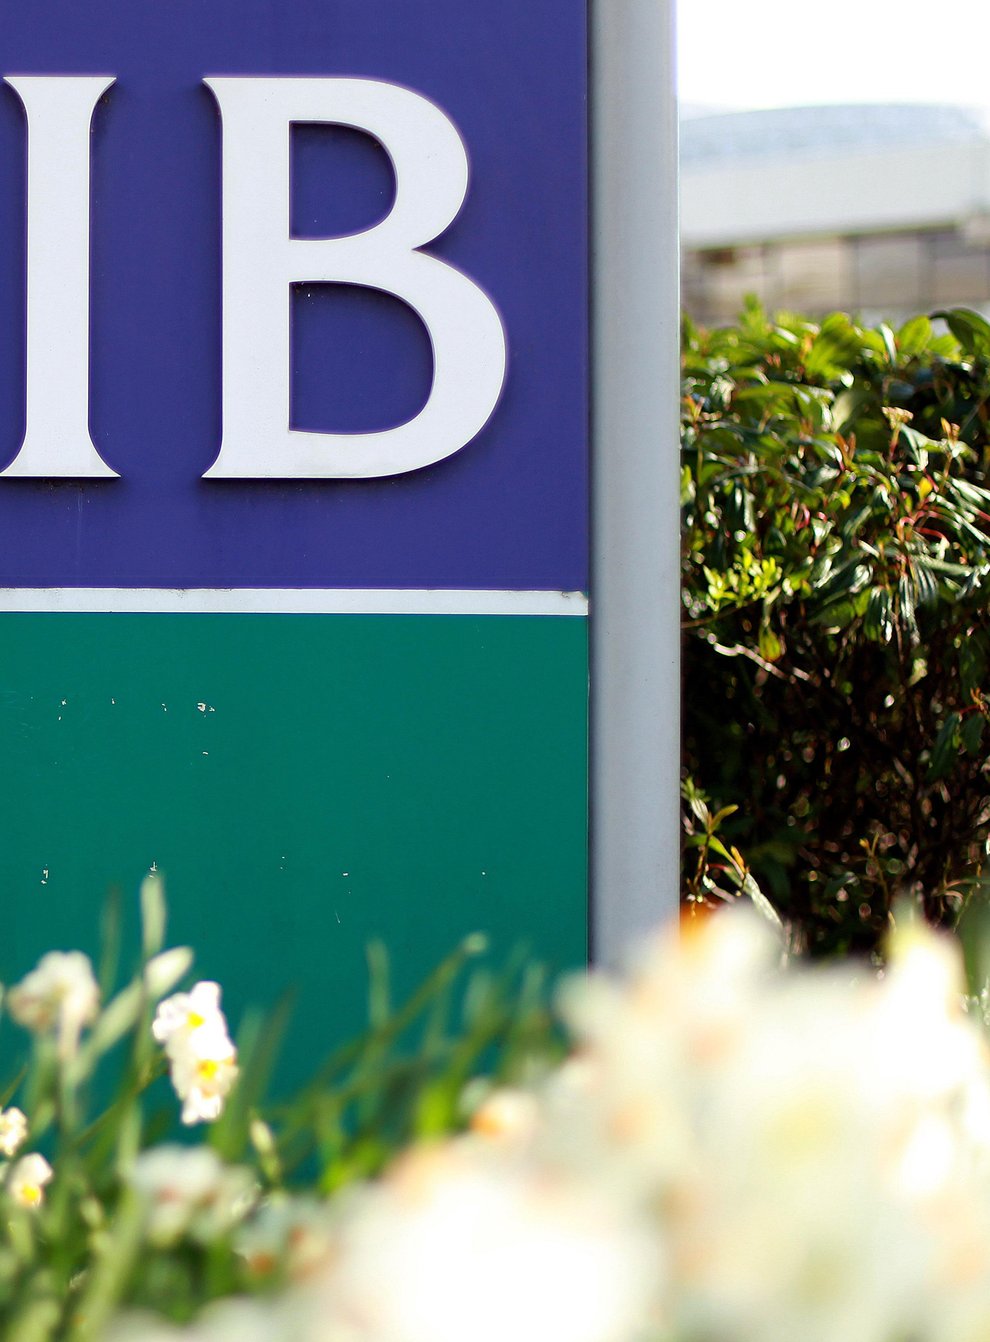 AIB Group has been fined over the tracker mortgage scandal (Julien Behal/PA)